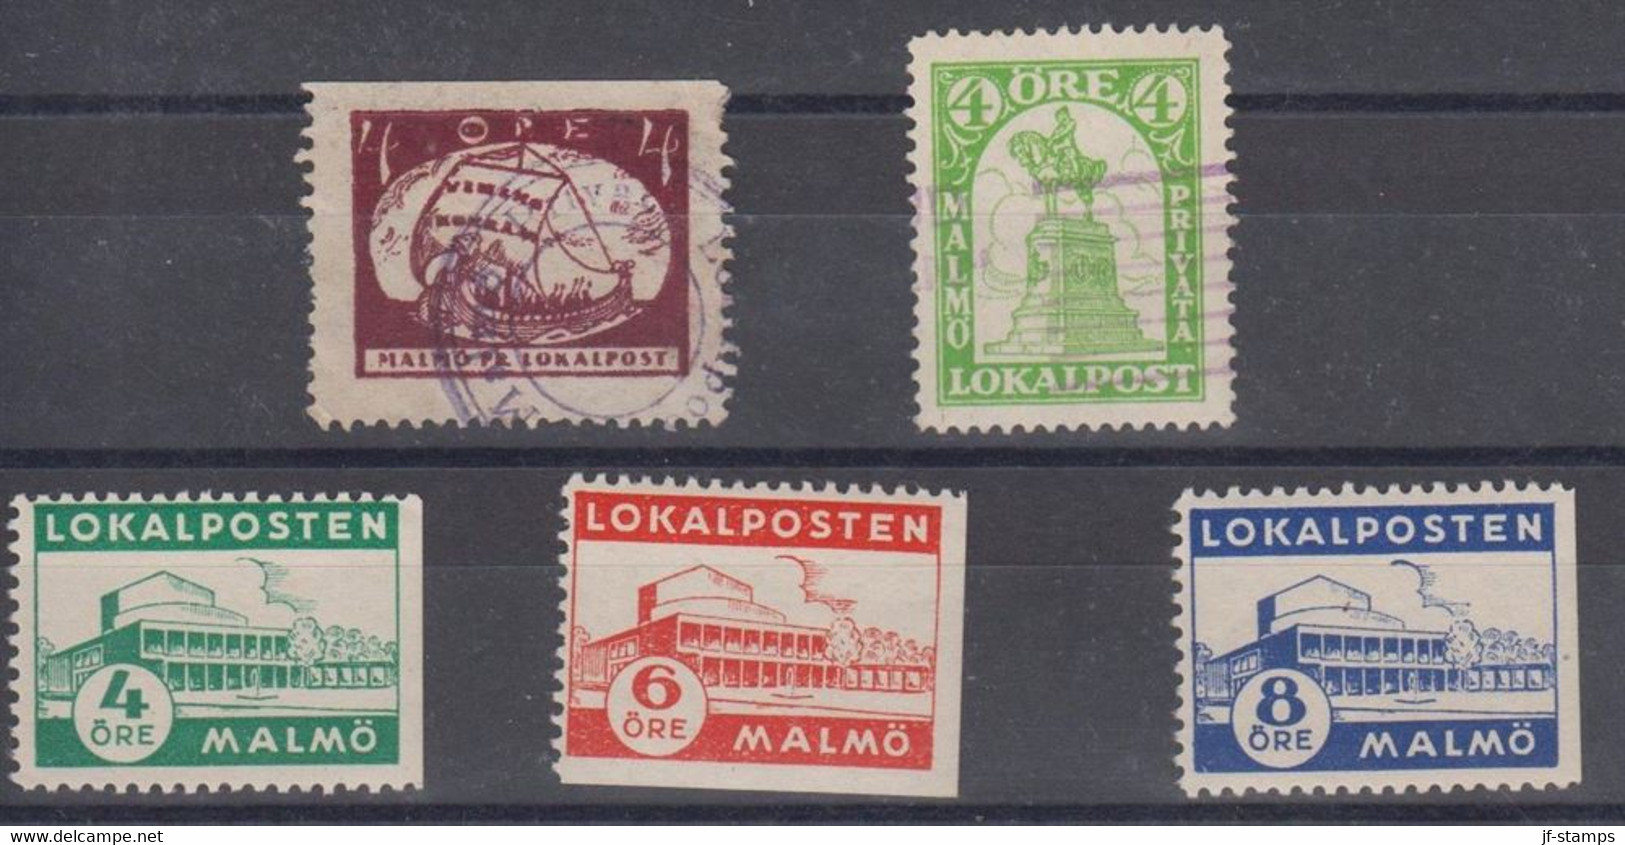 1926-1945. SVERIGE. MALMÖ LOKALPOST 2 Cancelled Stamps And LOKALPOSTEN MALMÖ 3 Never Hinged Stamps.  - JF520097 - Emisiones Locales